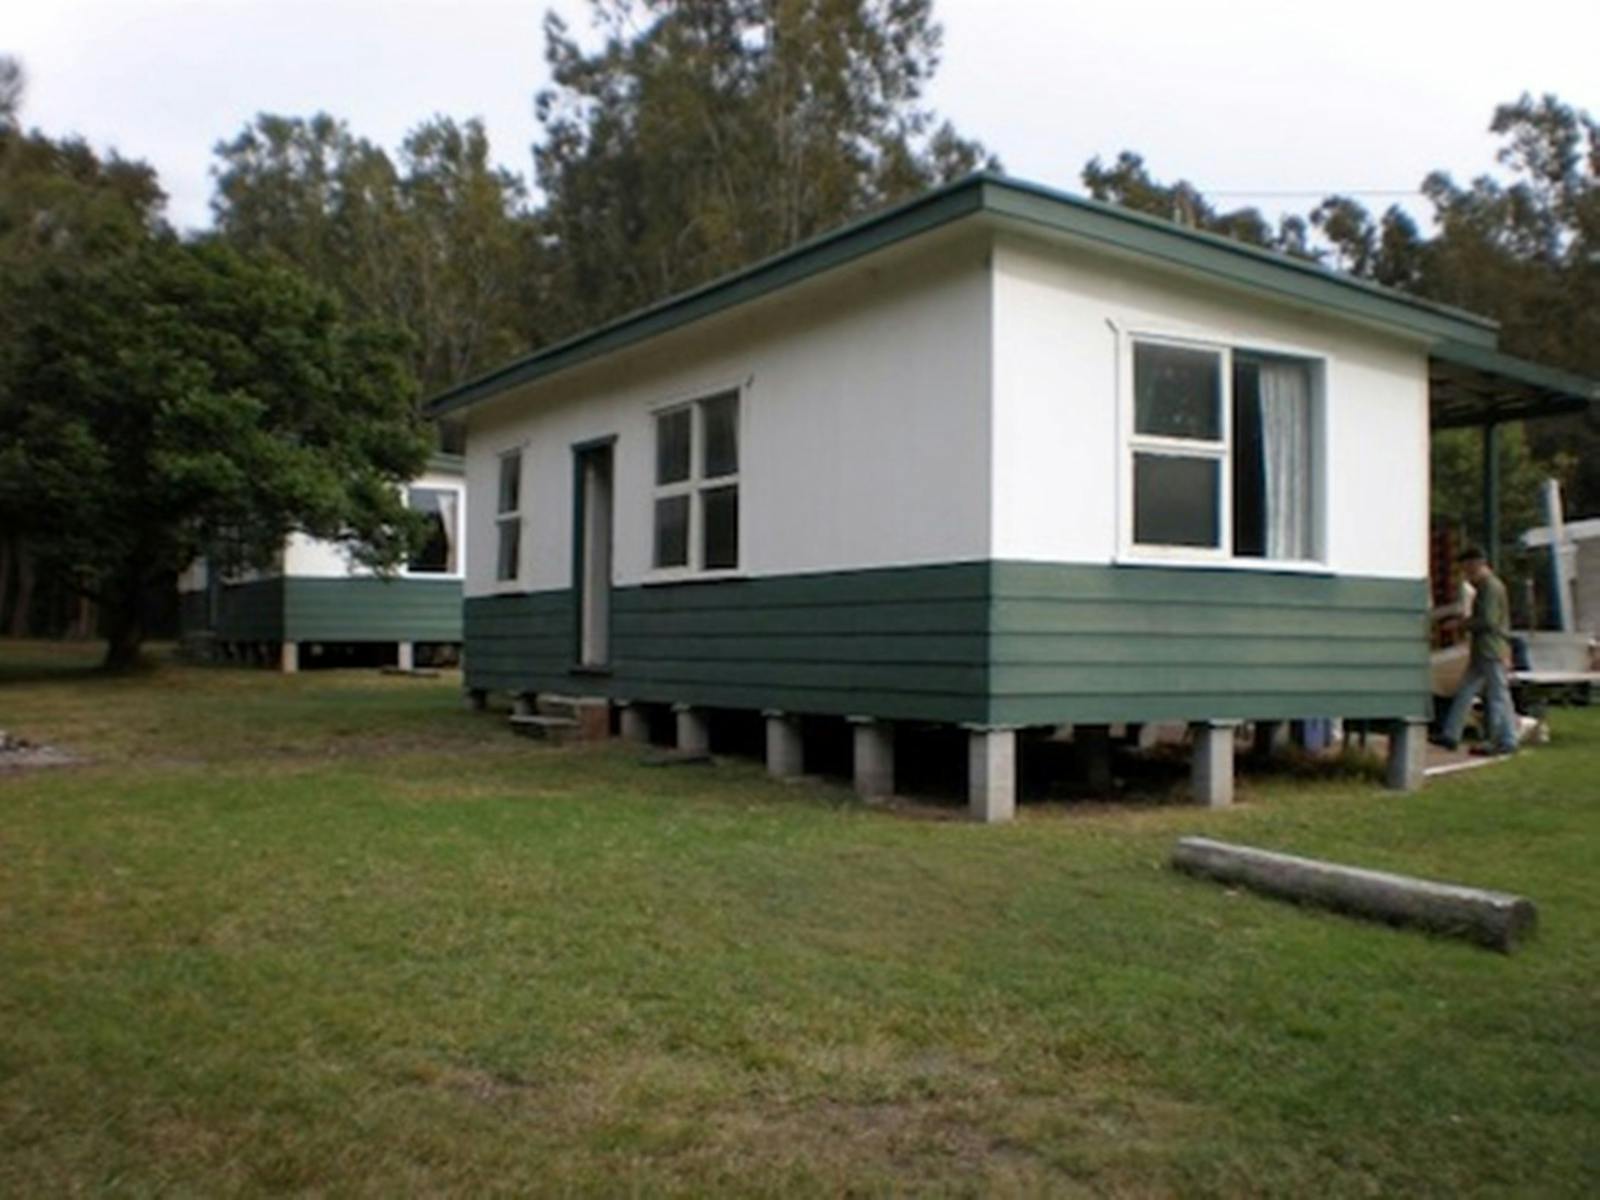 These cabins were built fifty years ago out of second and third hand materials by rank amateurs !